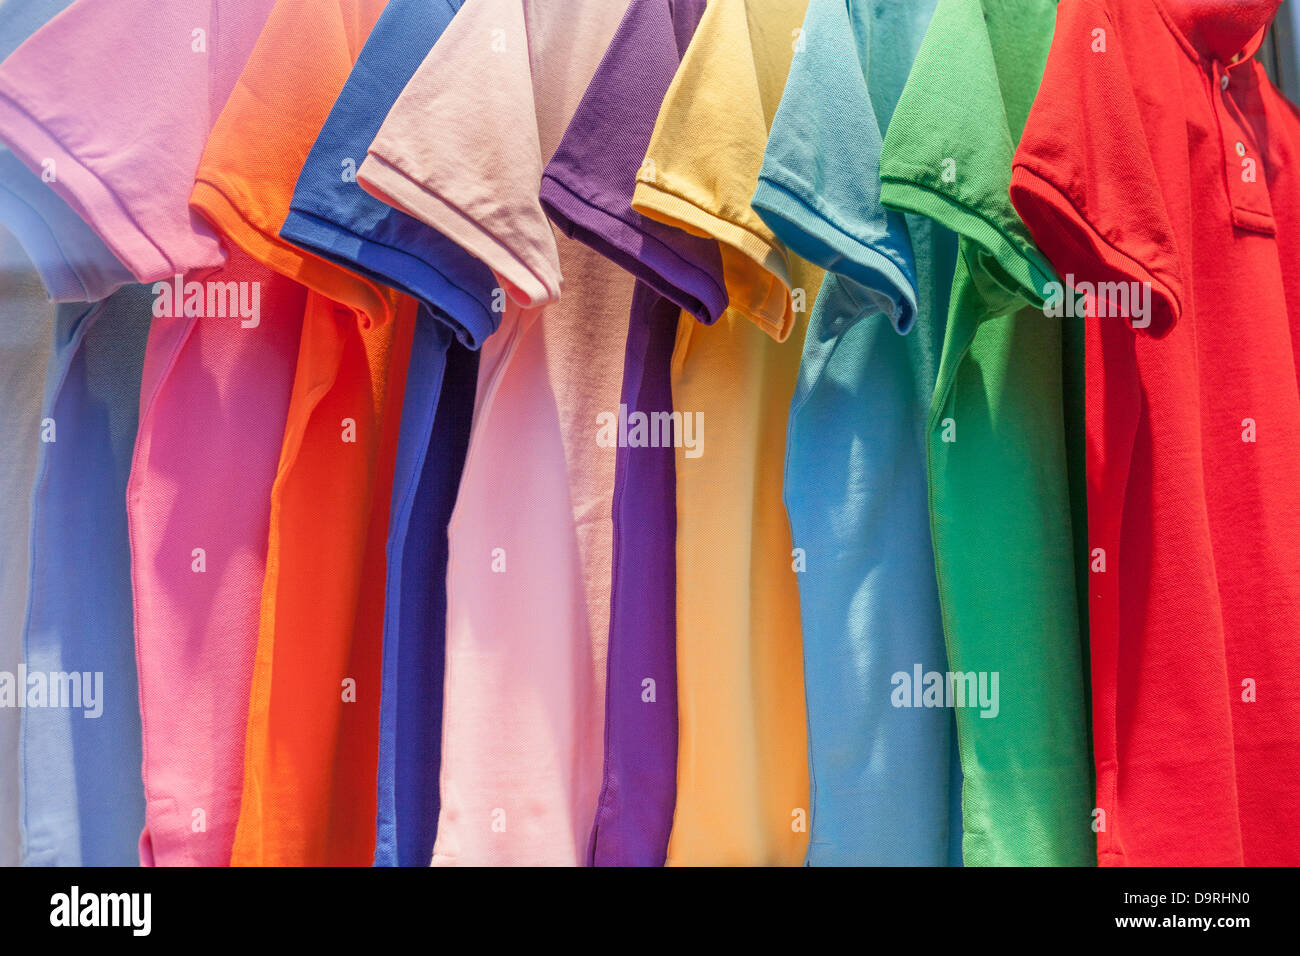 Colourful t-shirts Stock Photo